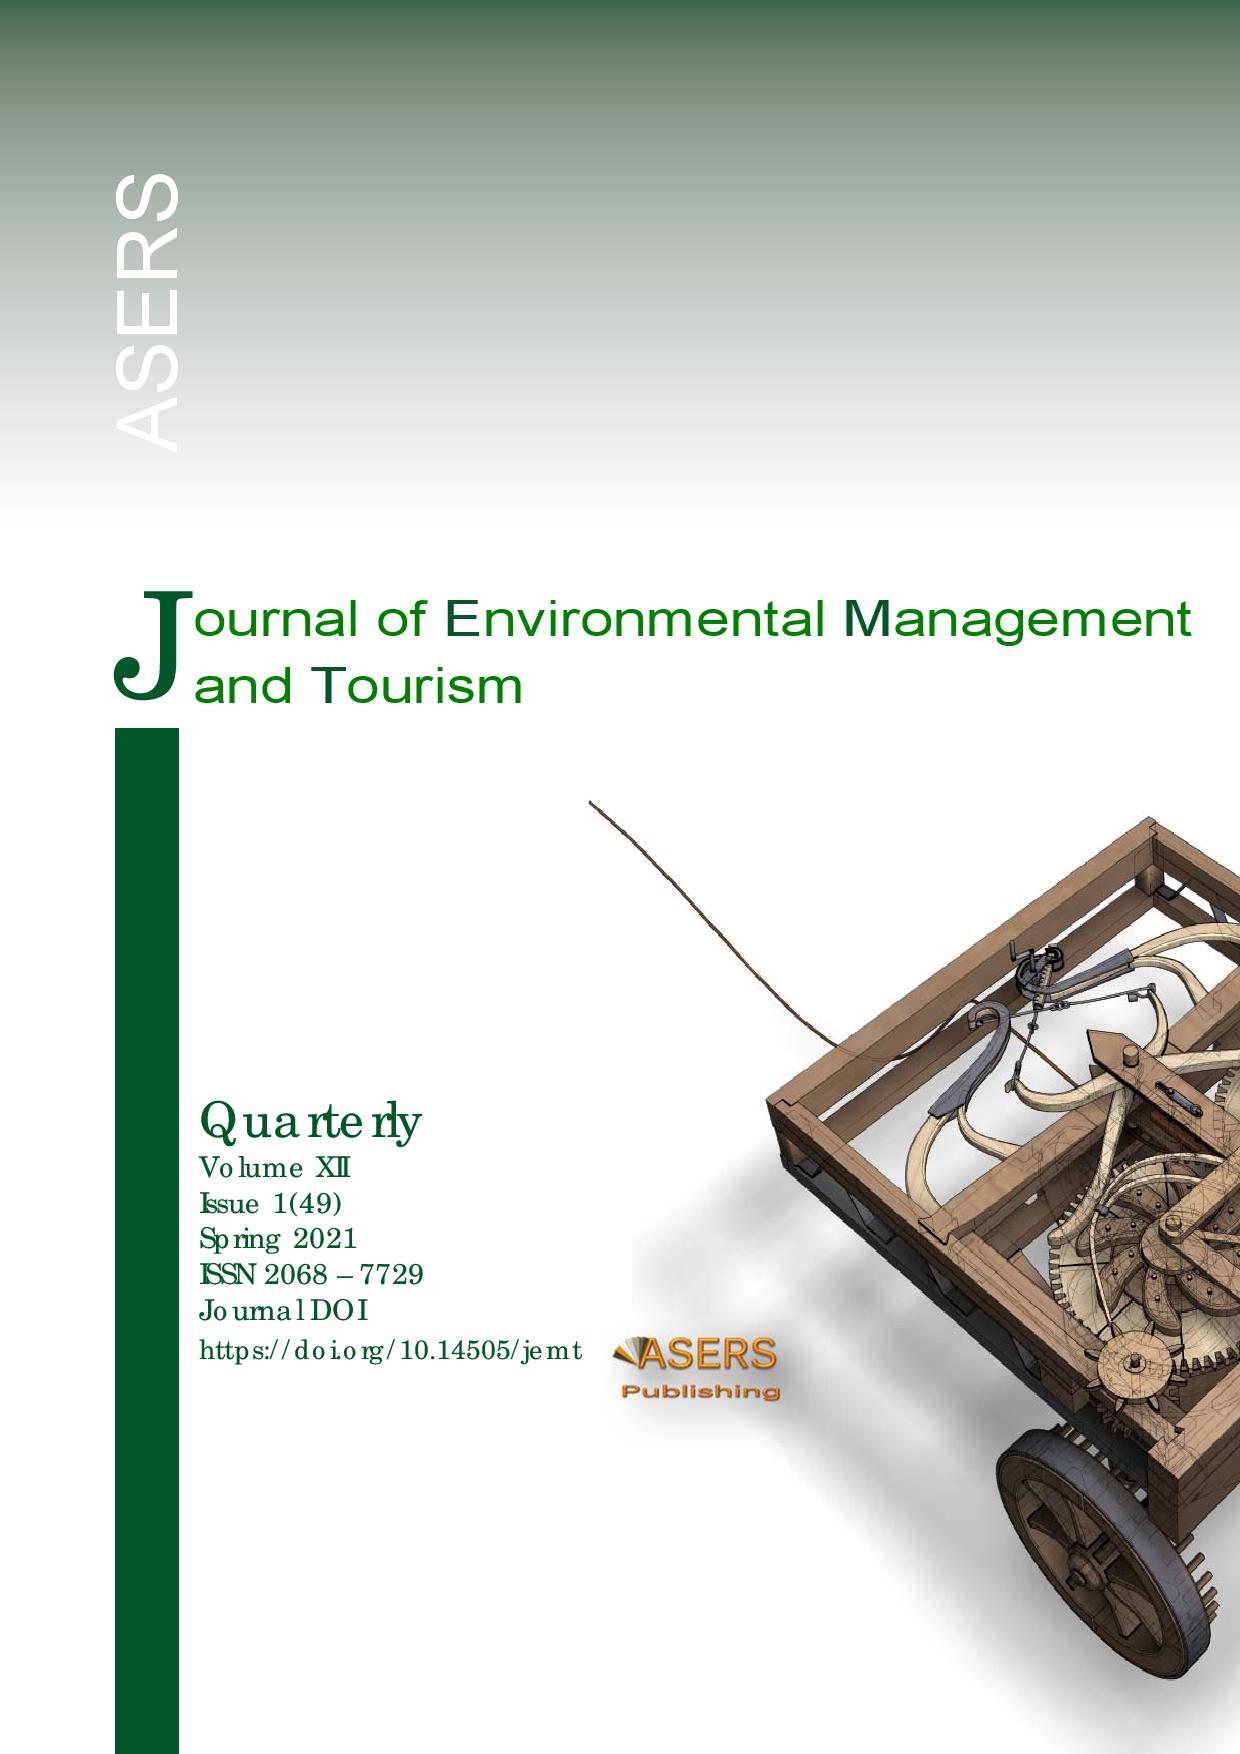 The Perceptions of Residents and Businesses towards the Sustainable Development of Tourism Cover Image